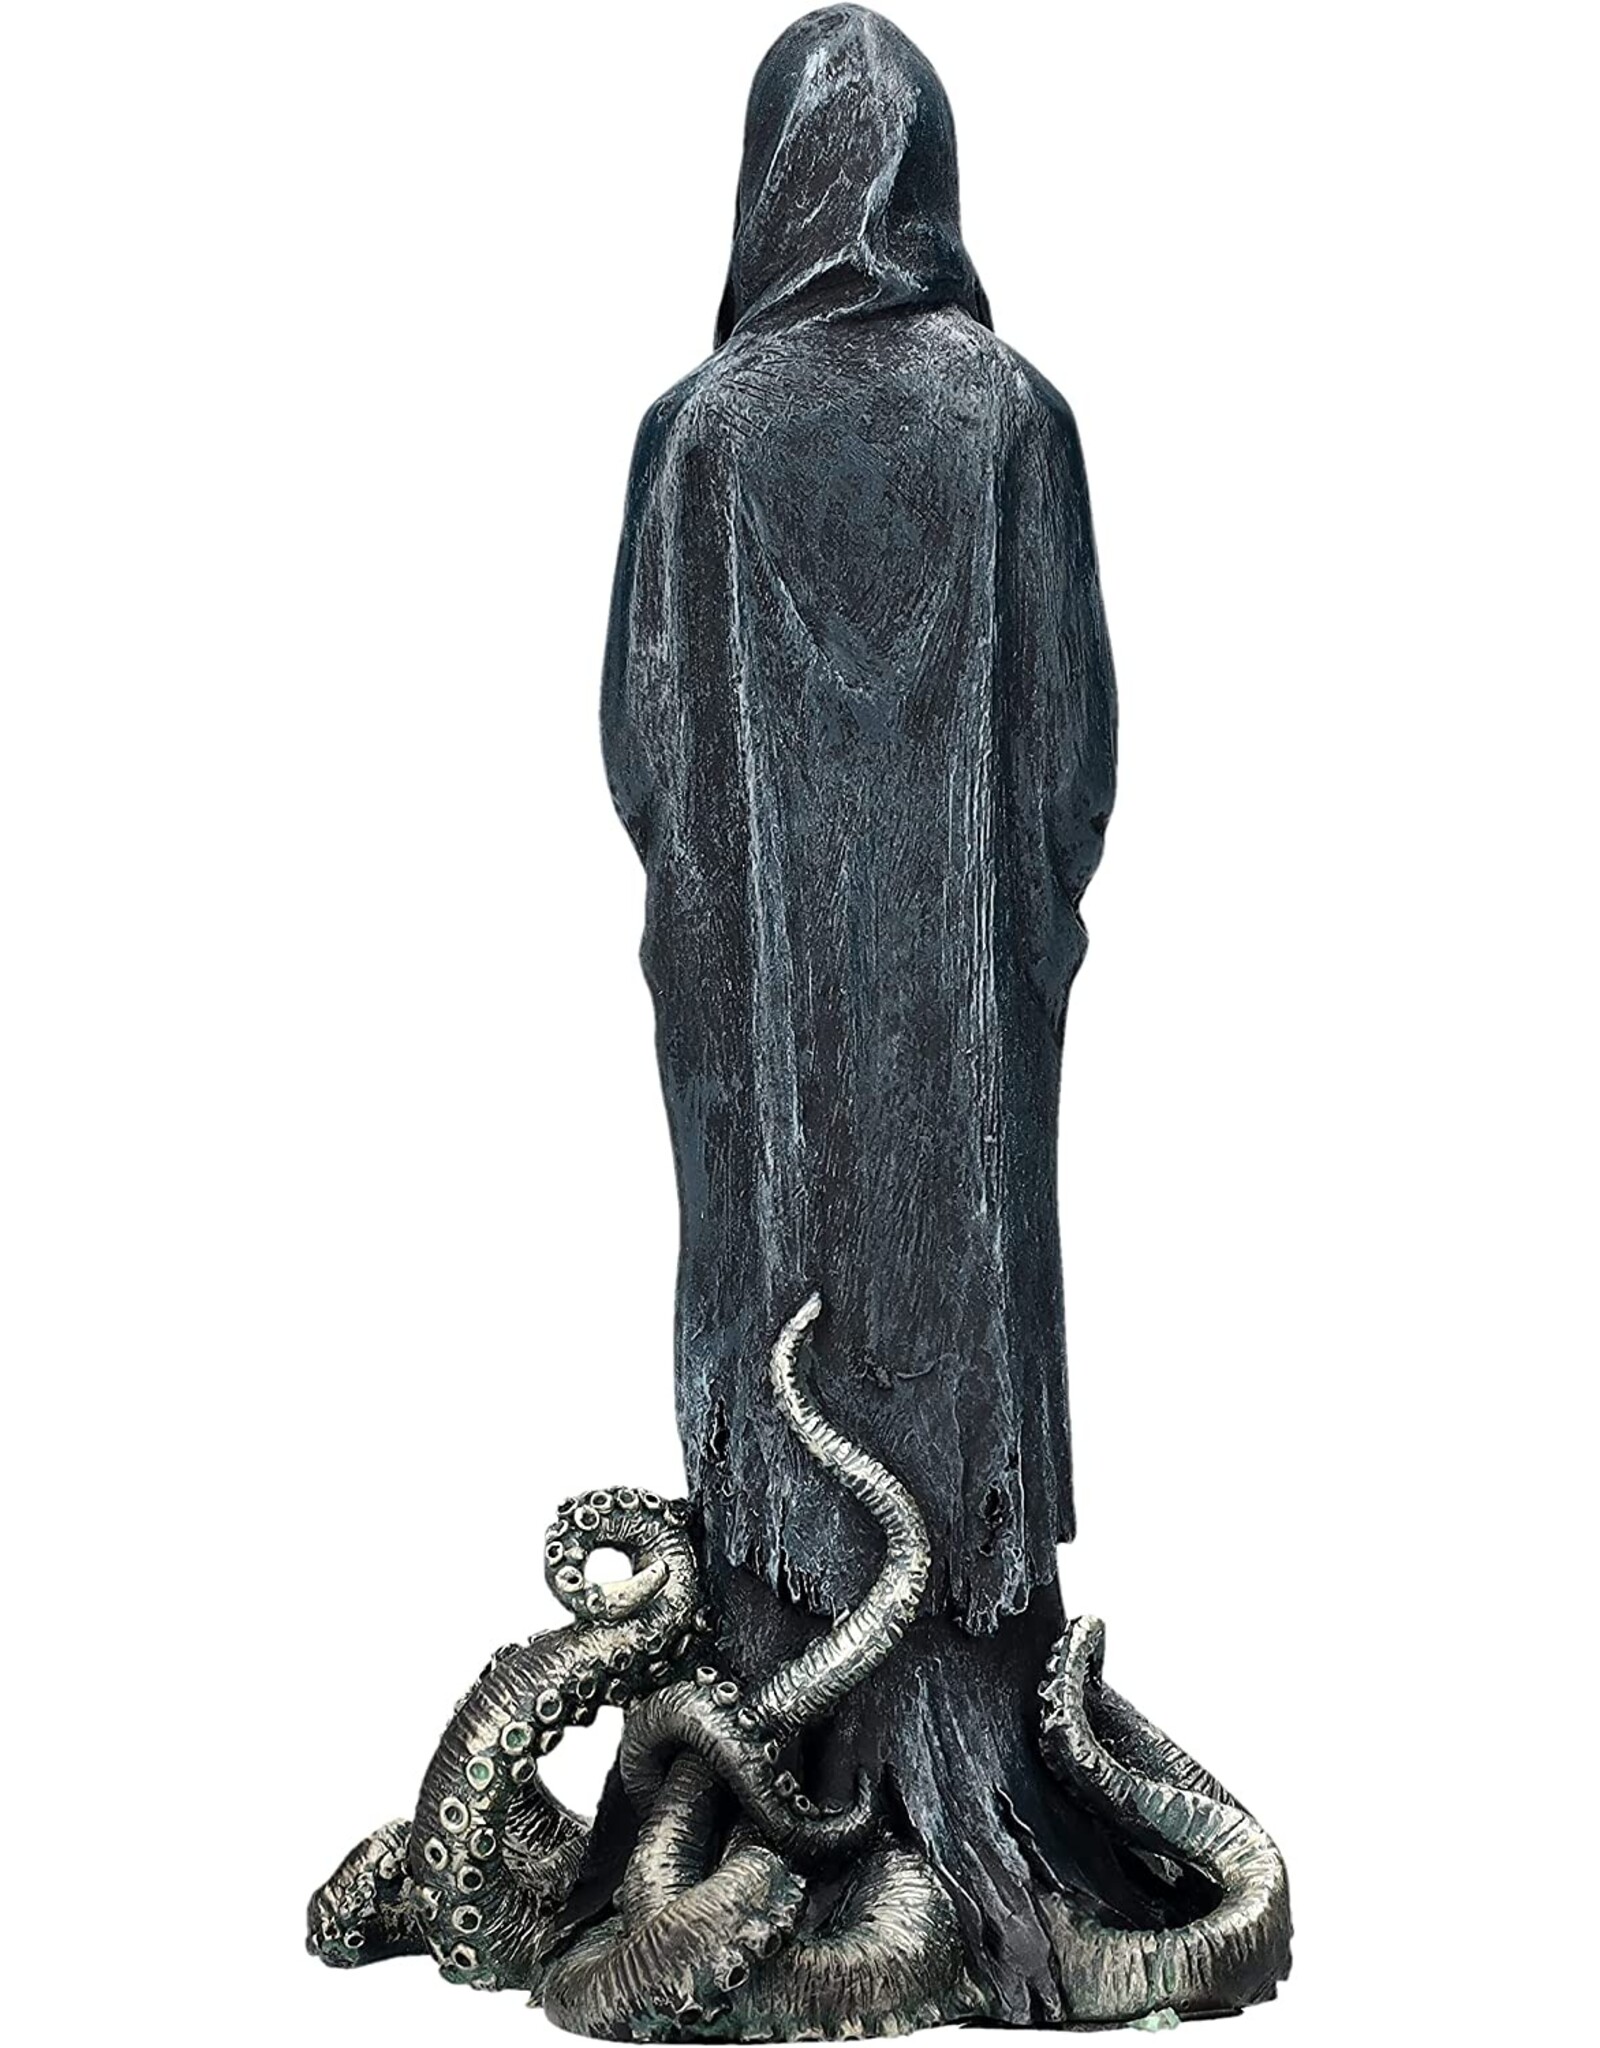 VG Giftware & Lifestyle - Call of Cthulhu Reaper figurine 20cm